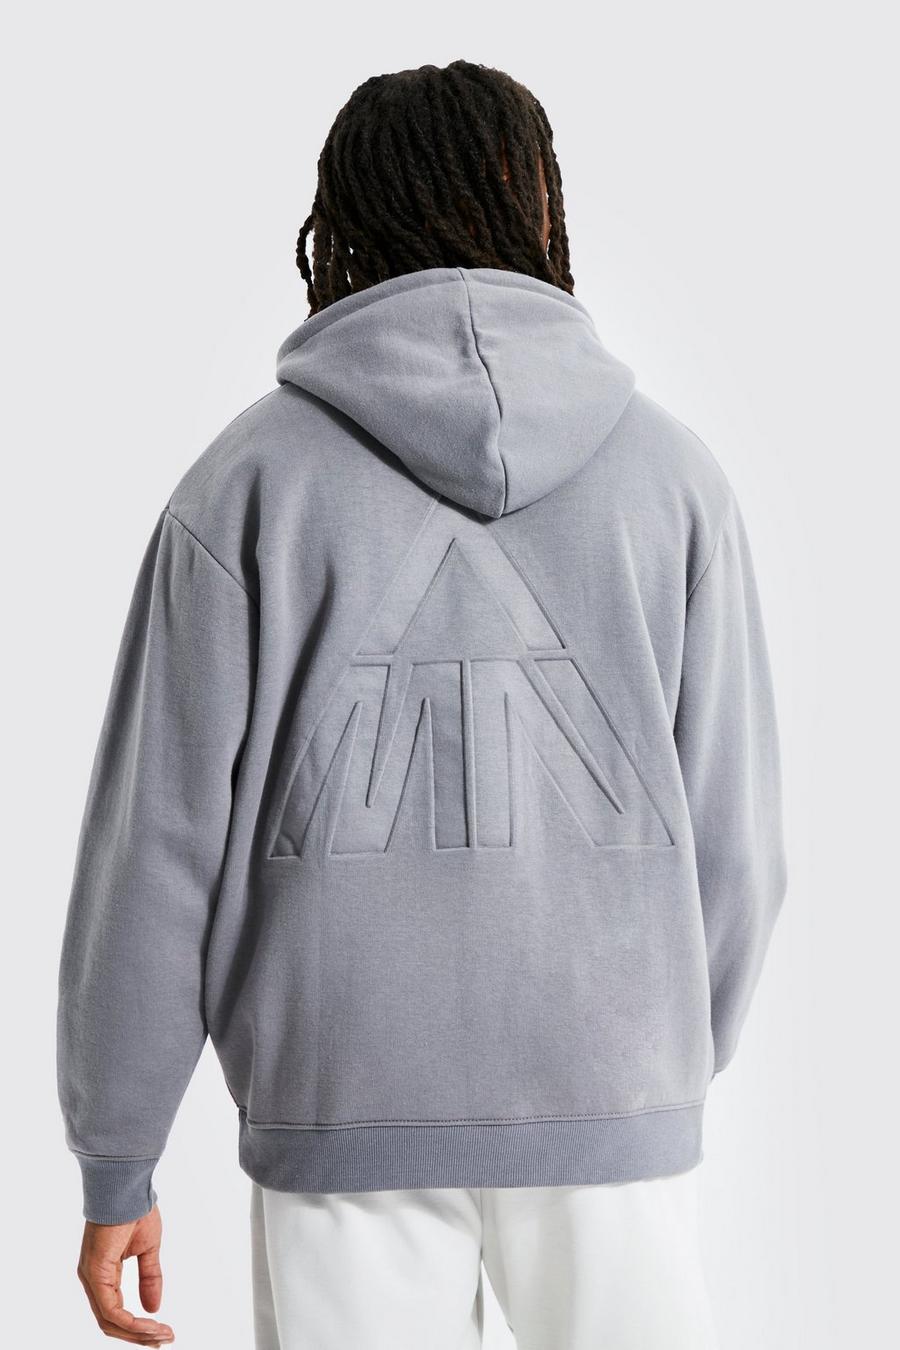 Charcoal grey Oversized Overdyed Debossed Graphic Hoodie